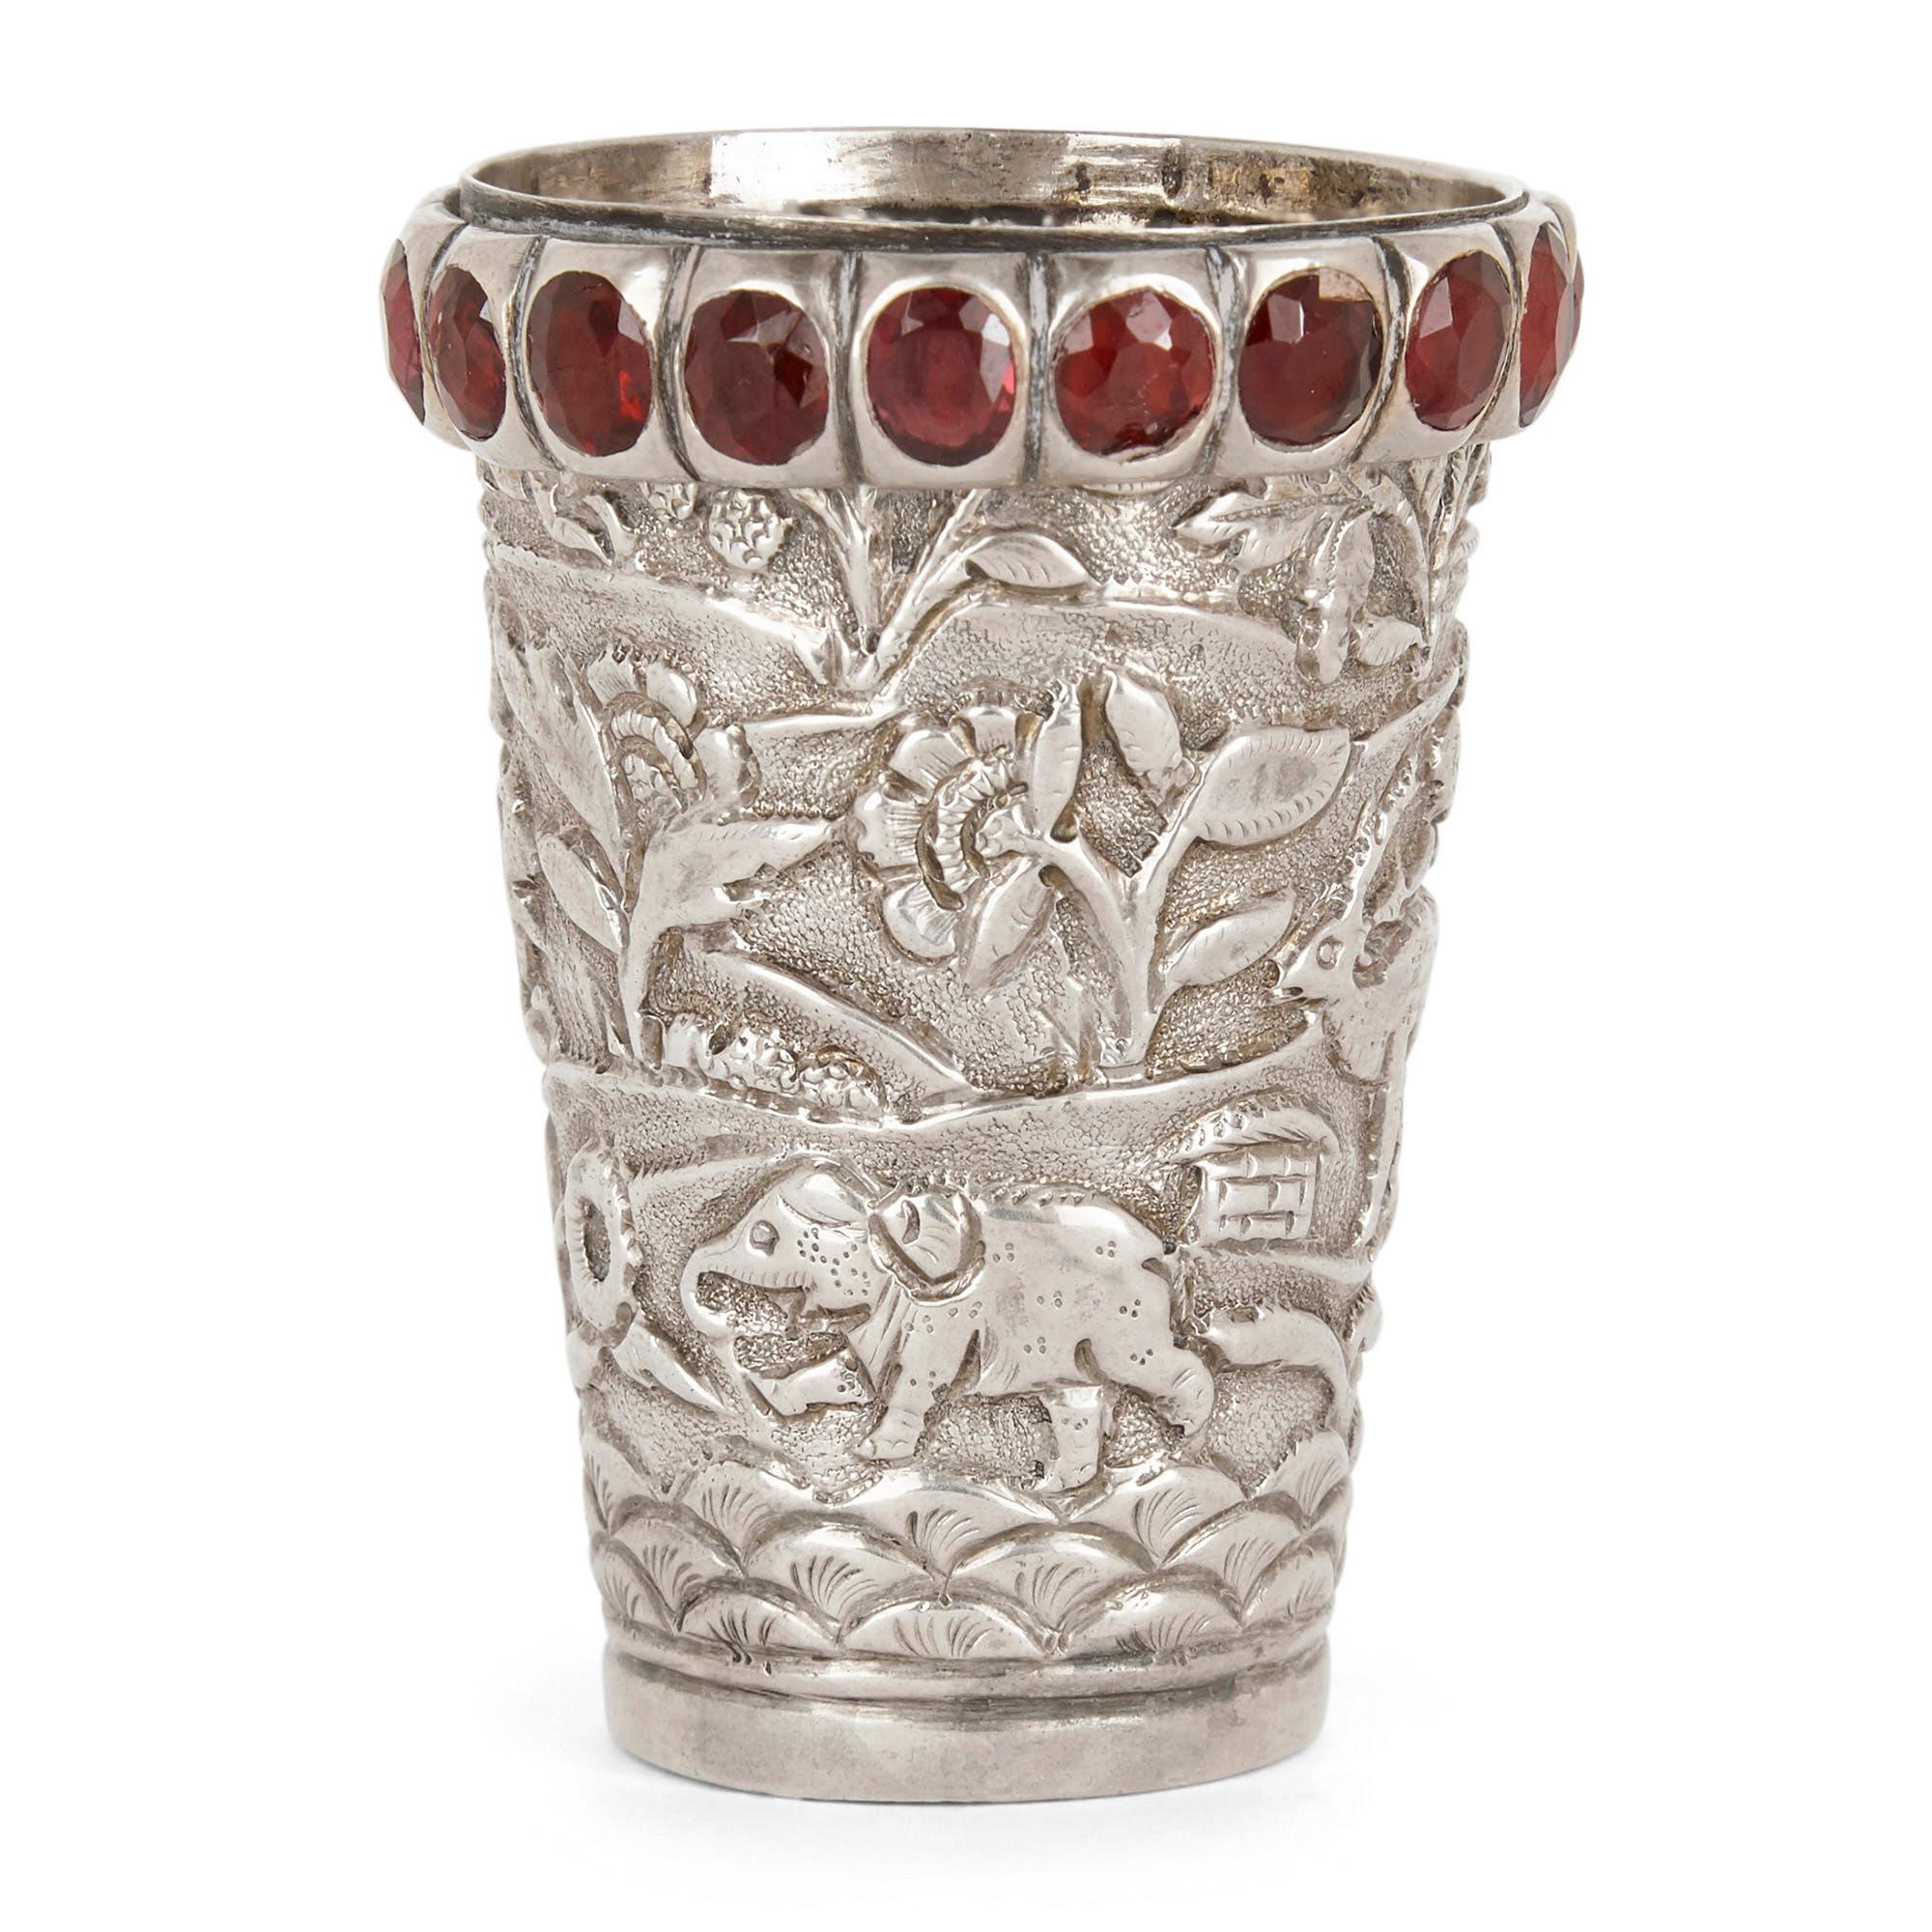 Indian silver cup with jewels and animals decoration
Indian, 19th century
Measures: Height 6cm, diameter 4cm

This charming Indian silver cup features wonderful embossed surface decoration. This figurative decoration depicts Indian animals in a